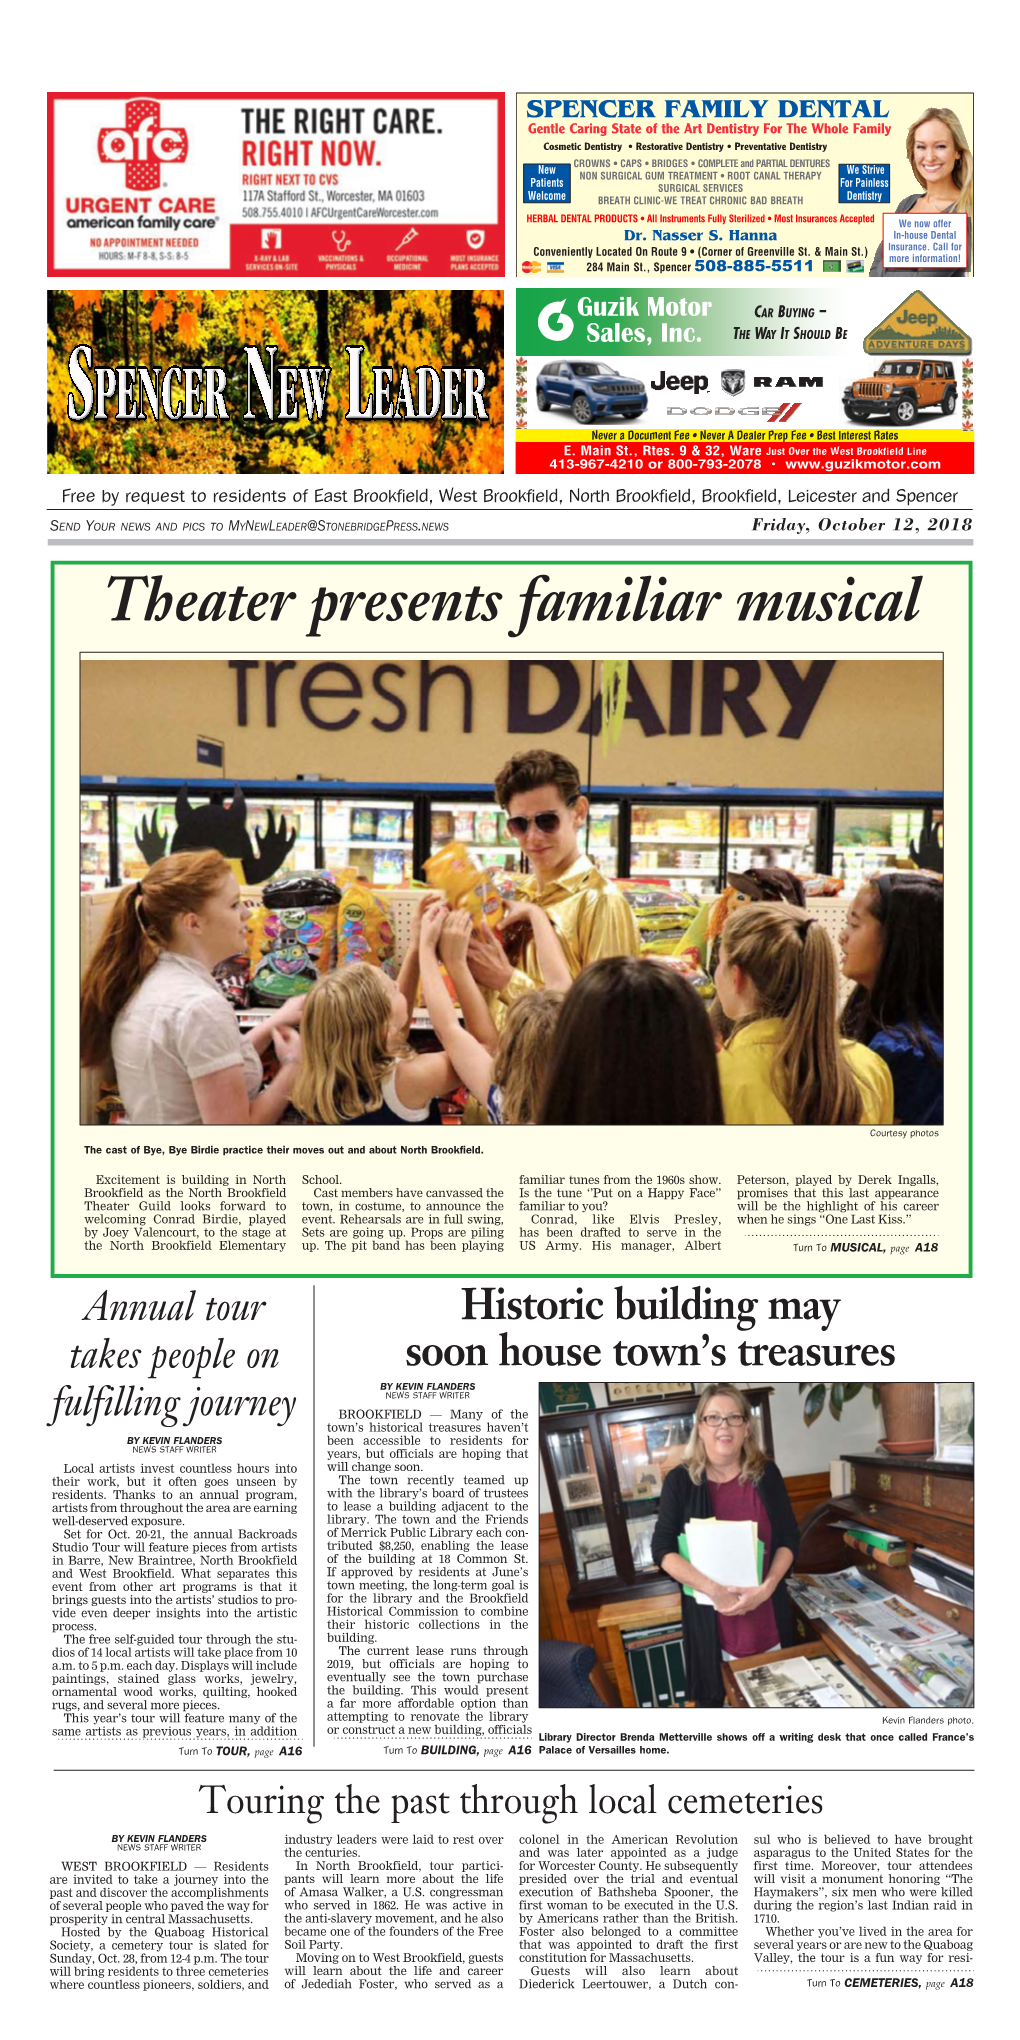 Theater Presents Familiar Musical